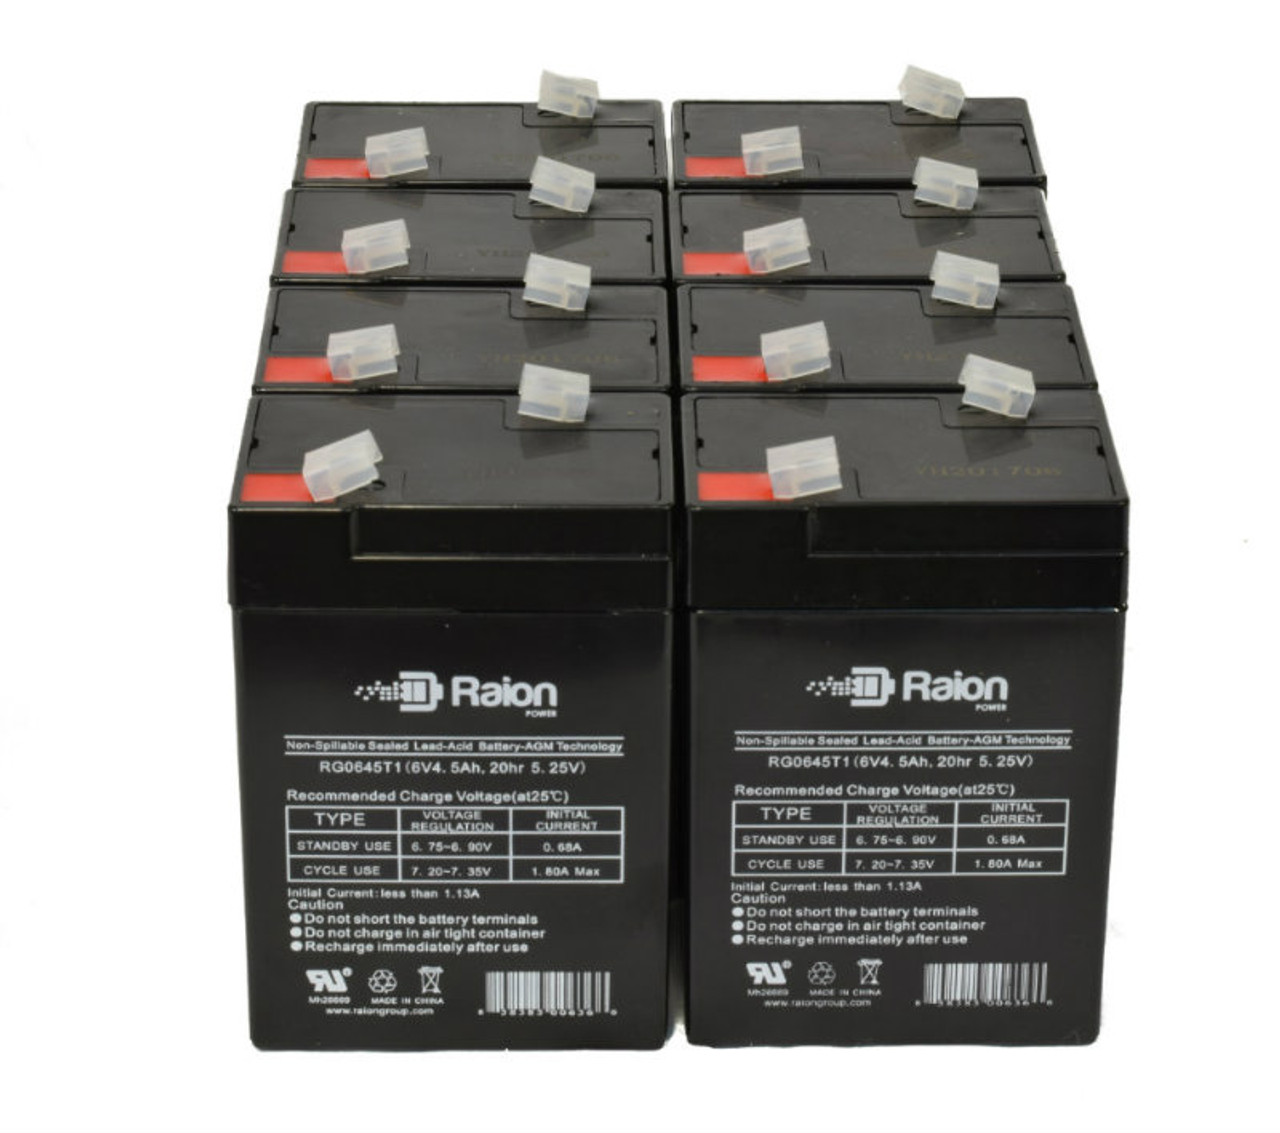 Raion Power 6V 4.5Ah Replacement Emergency Light Battery for Ademco 418O - 8 Pack